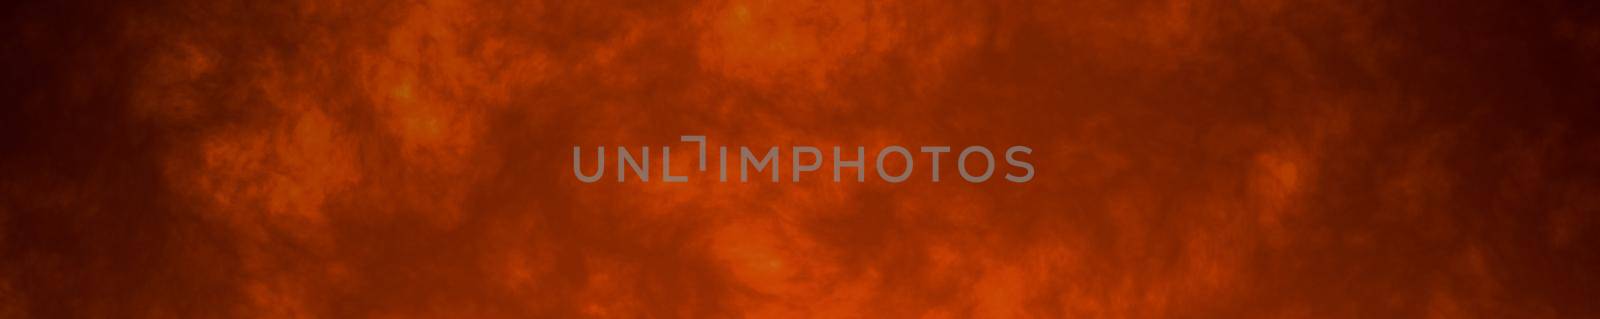 Abstract epic fire horizontal background with flame wave  by vikiriki